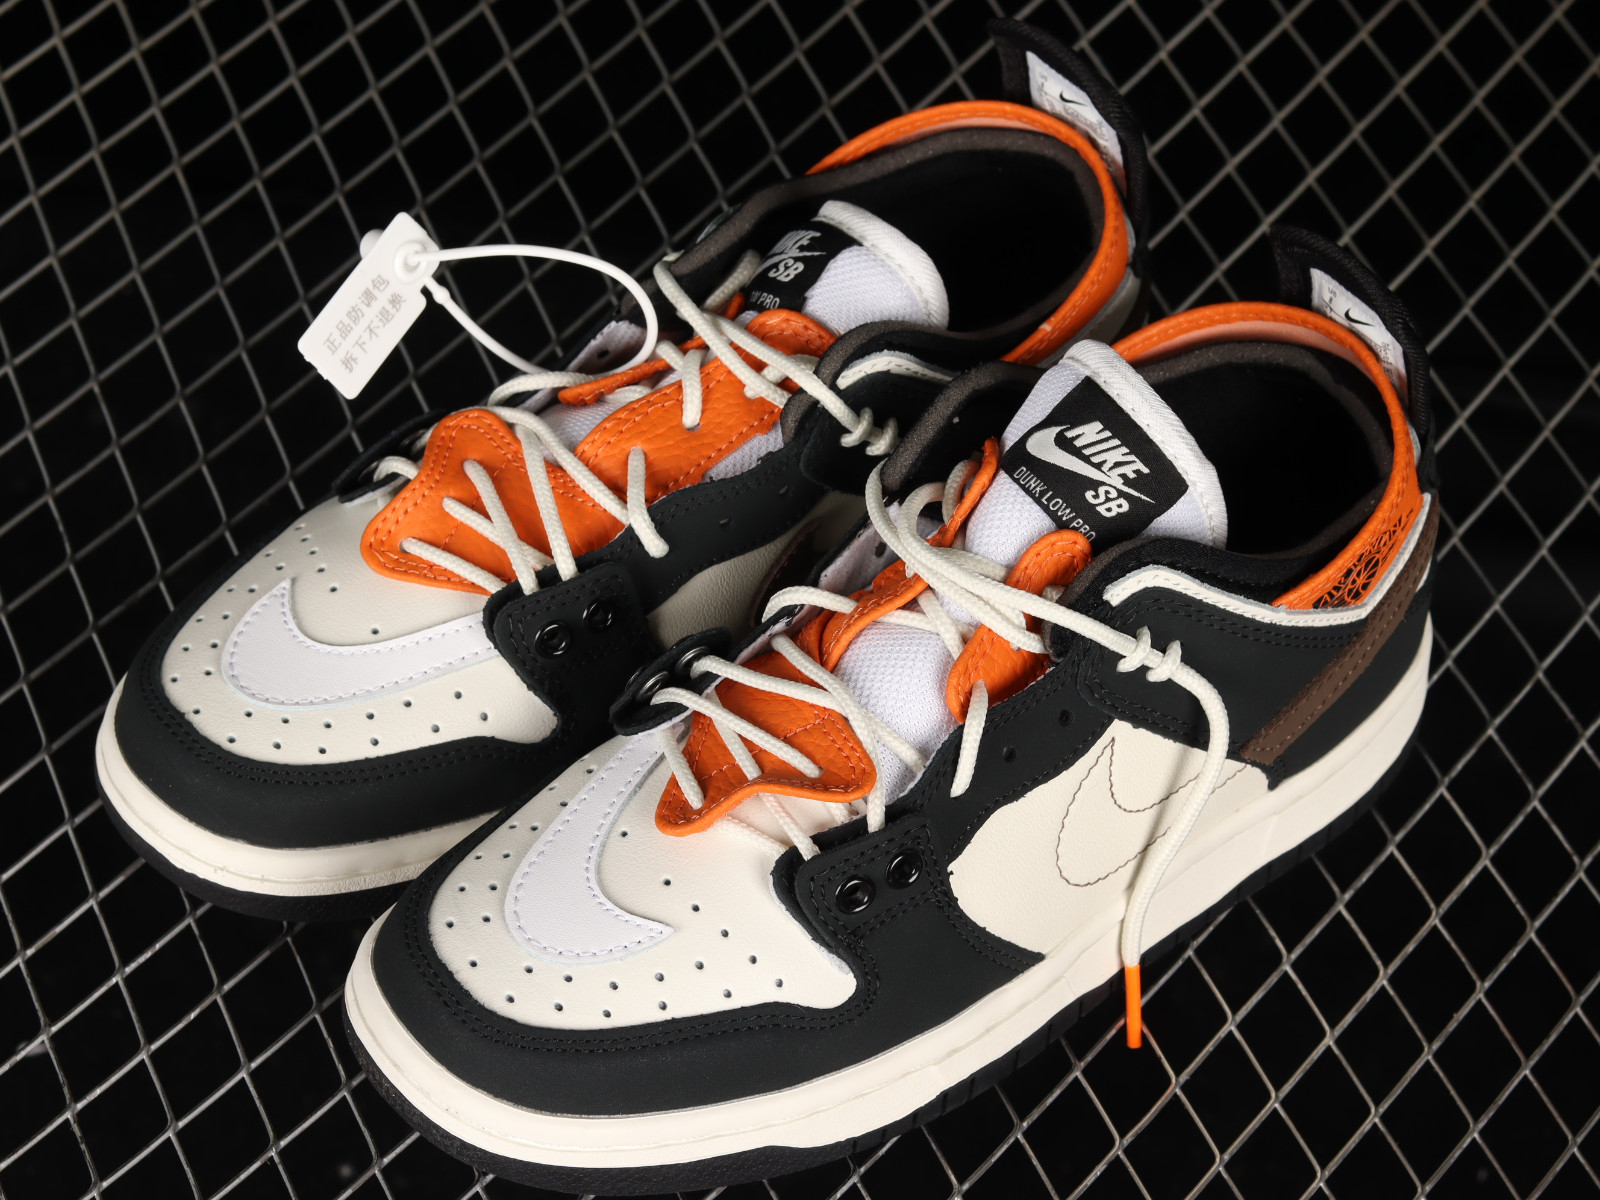 Nike SB Dunk Low Beige Black Orange Brown - 025 - MultiscaleconsultingShops - is a at the Nike Max 90 PRM "London"